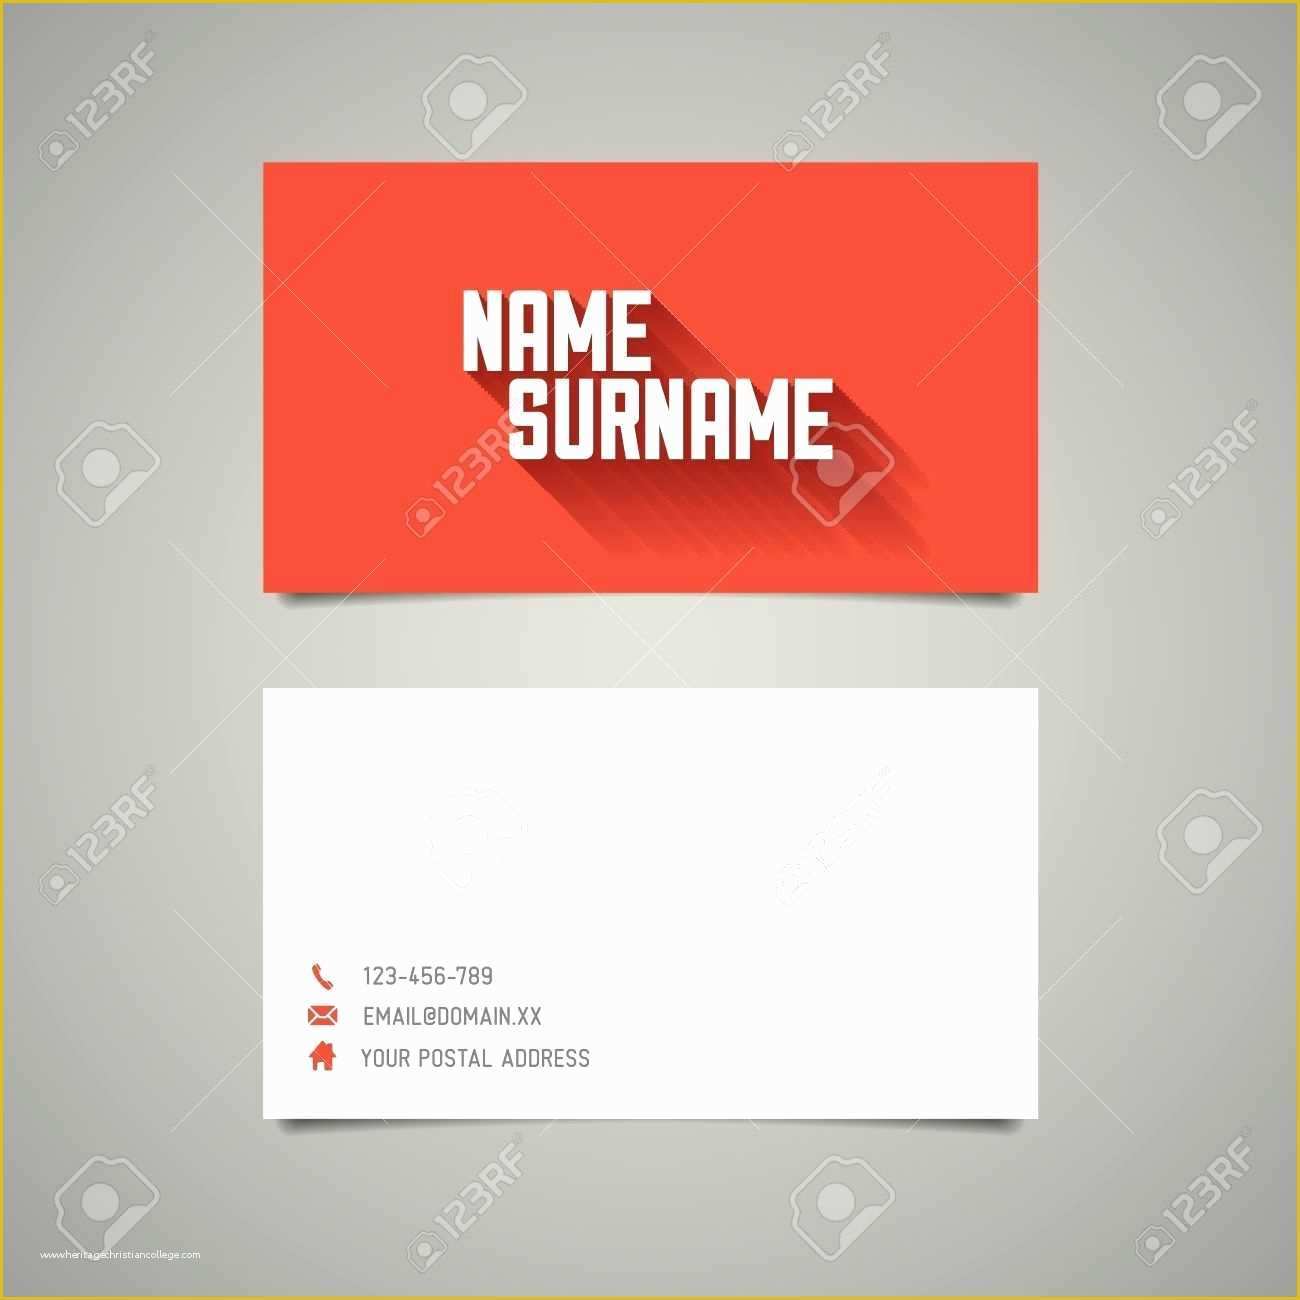 Microsoft Word Business Card Template Free Of 12 Lovely Ms Word Business Card Templates Graphics